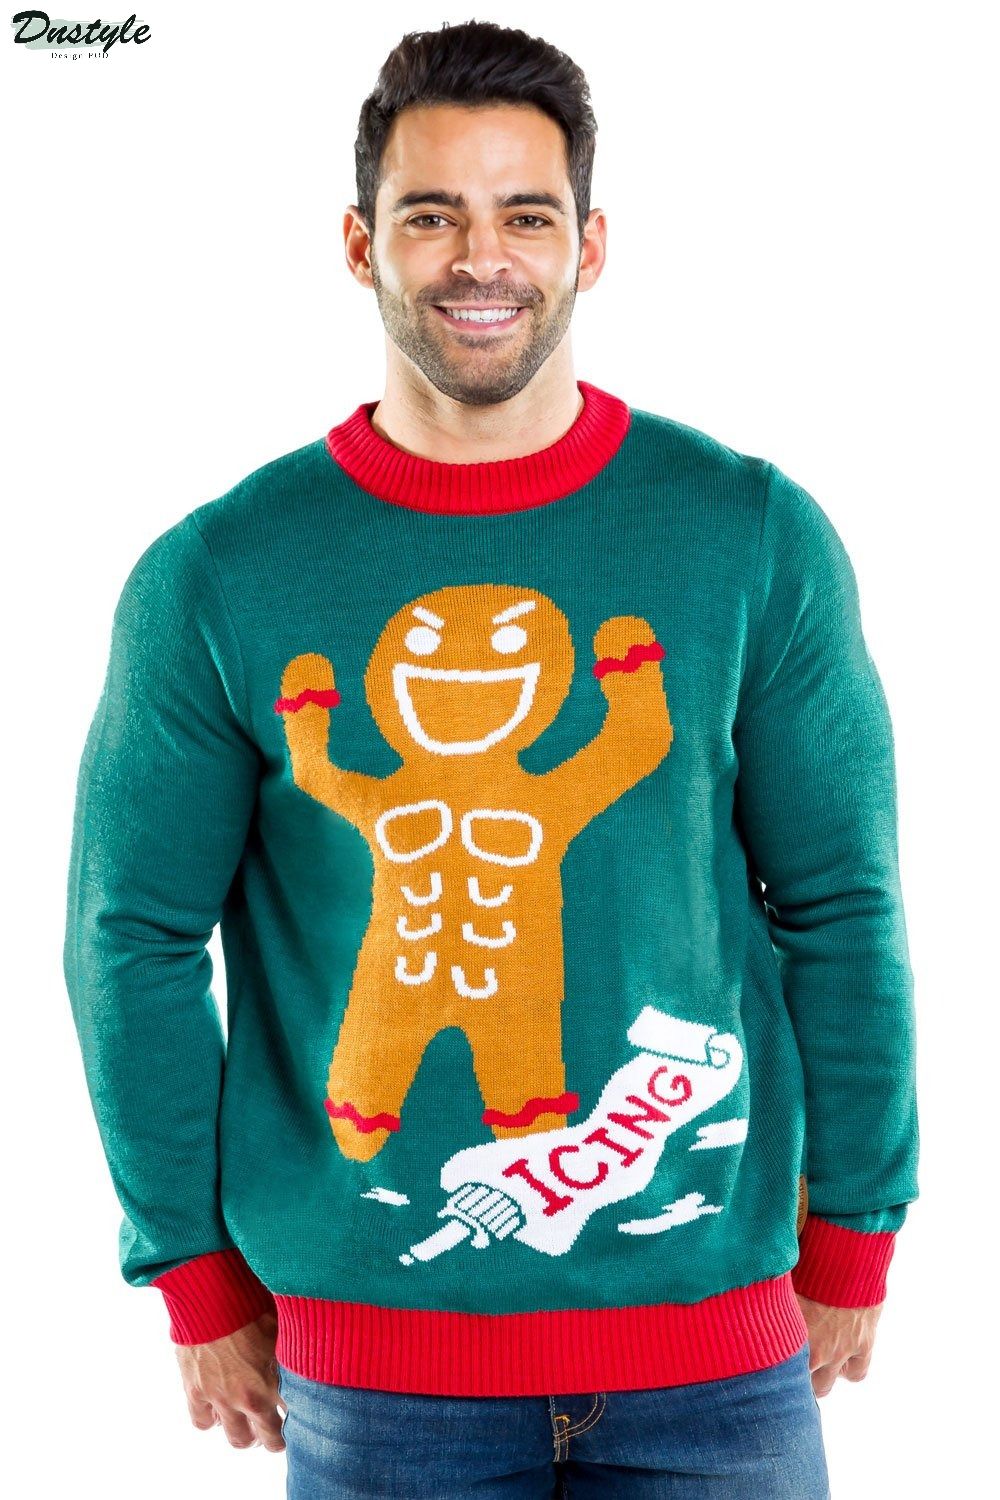 Gingerbread man roid rage ugly christmas sweater 1